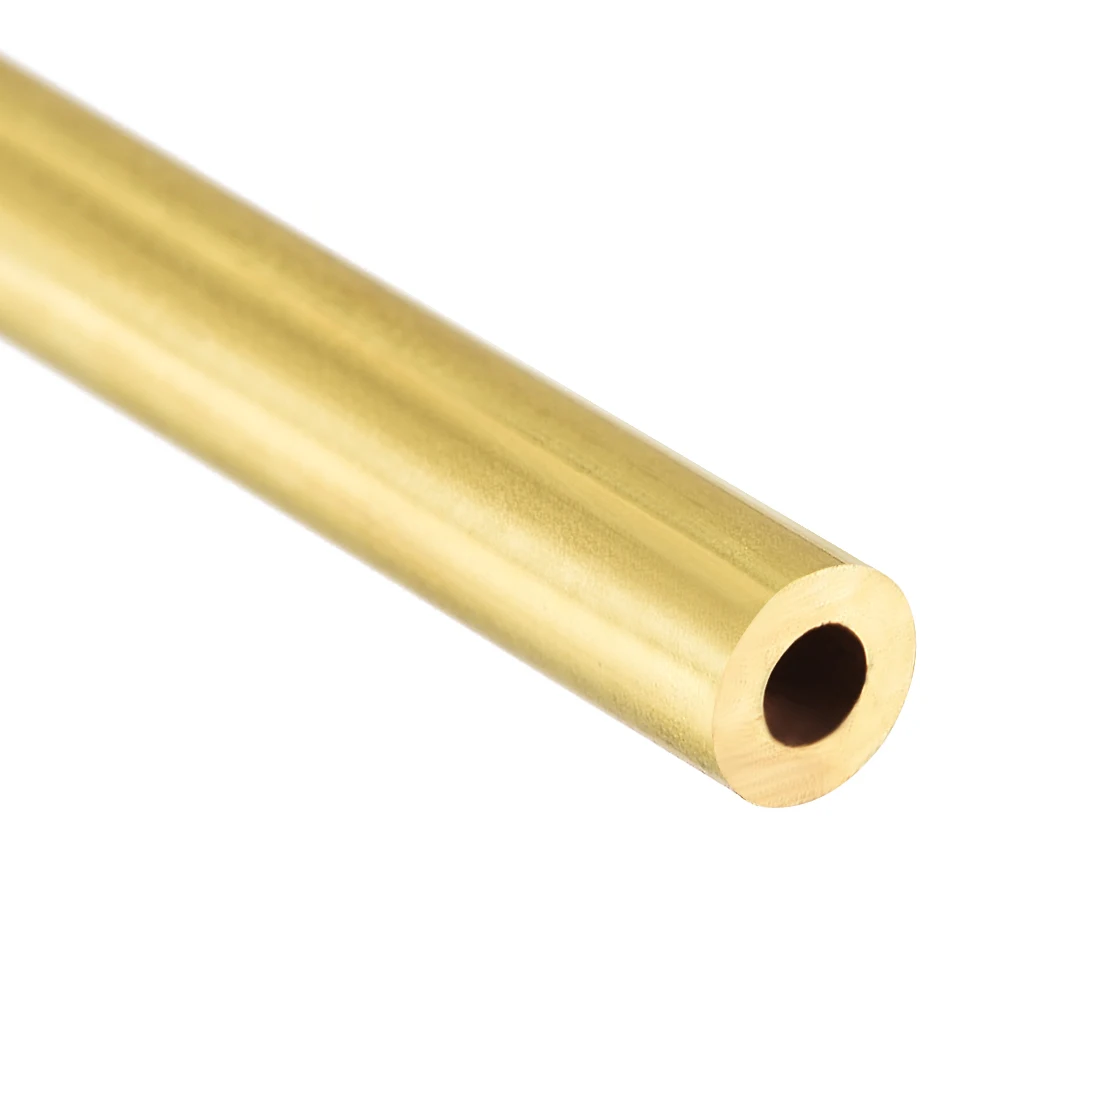 uxcell Brass Round Tube 300mm Length 8mm OD 1mm Wall Thickness Seamless Straight Pipe Tubing 2 Pcs